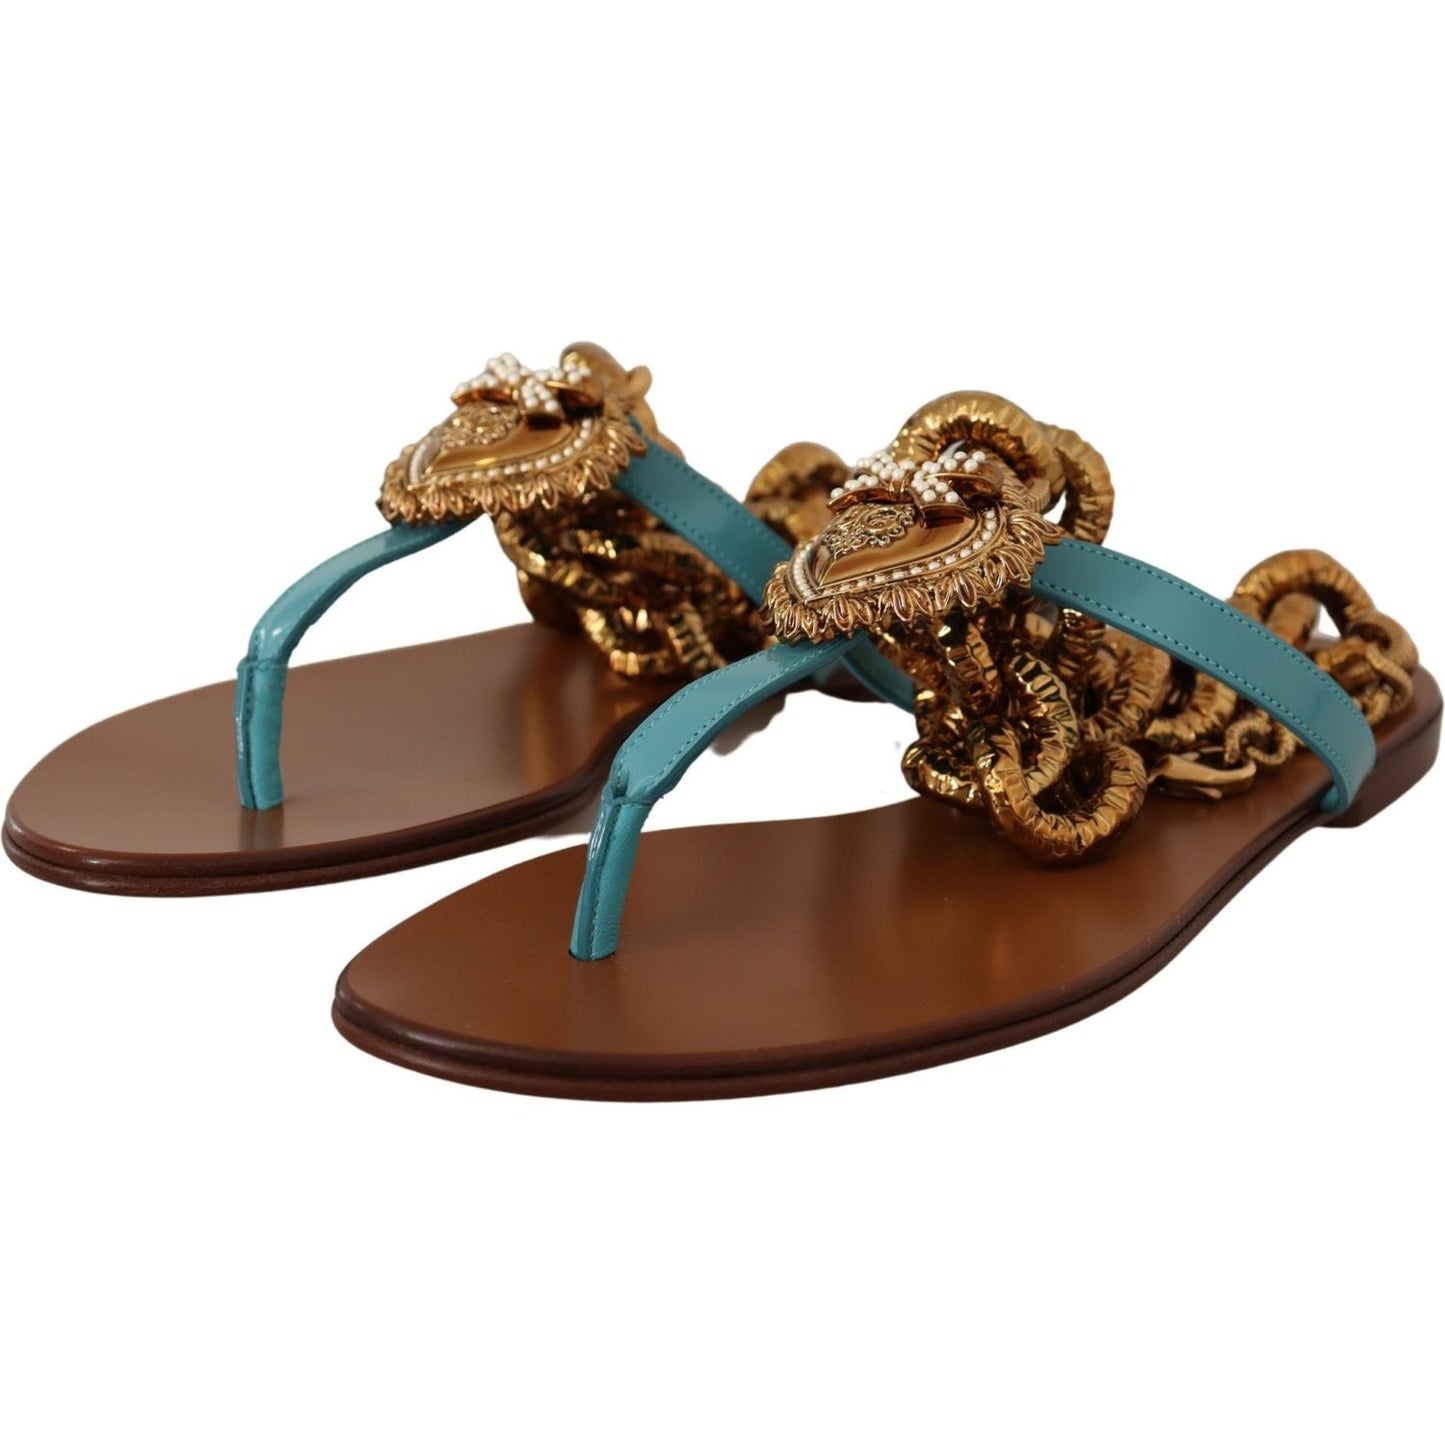 Chic Gladiator Flats with Heart Devotion Detail